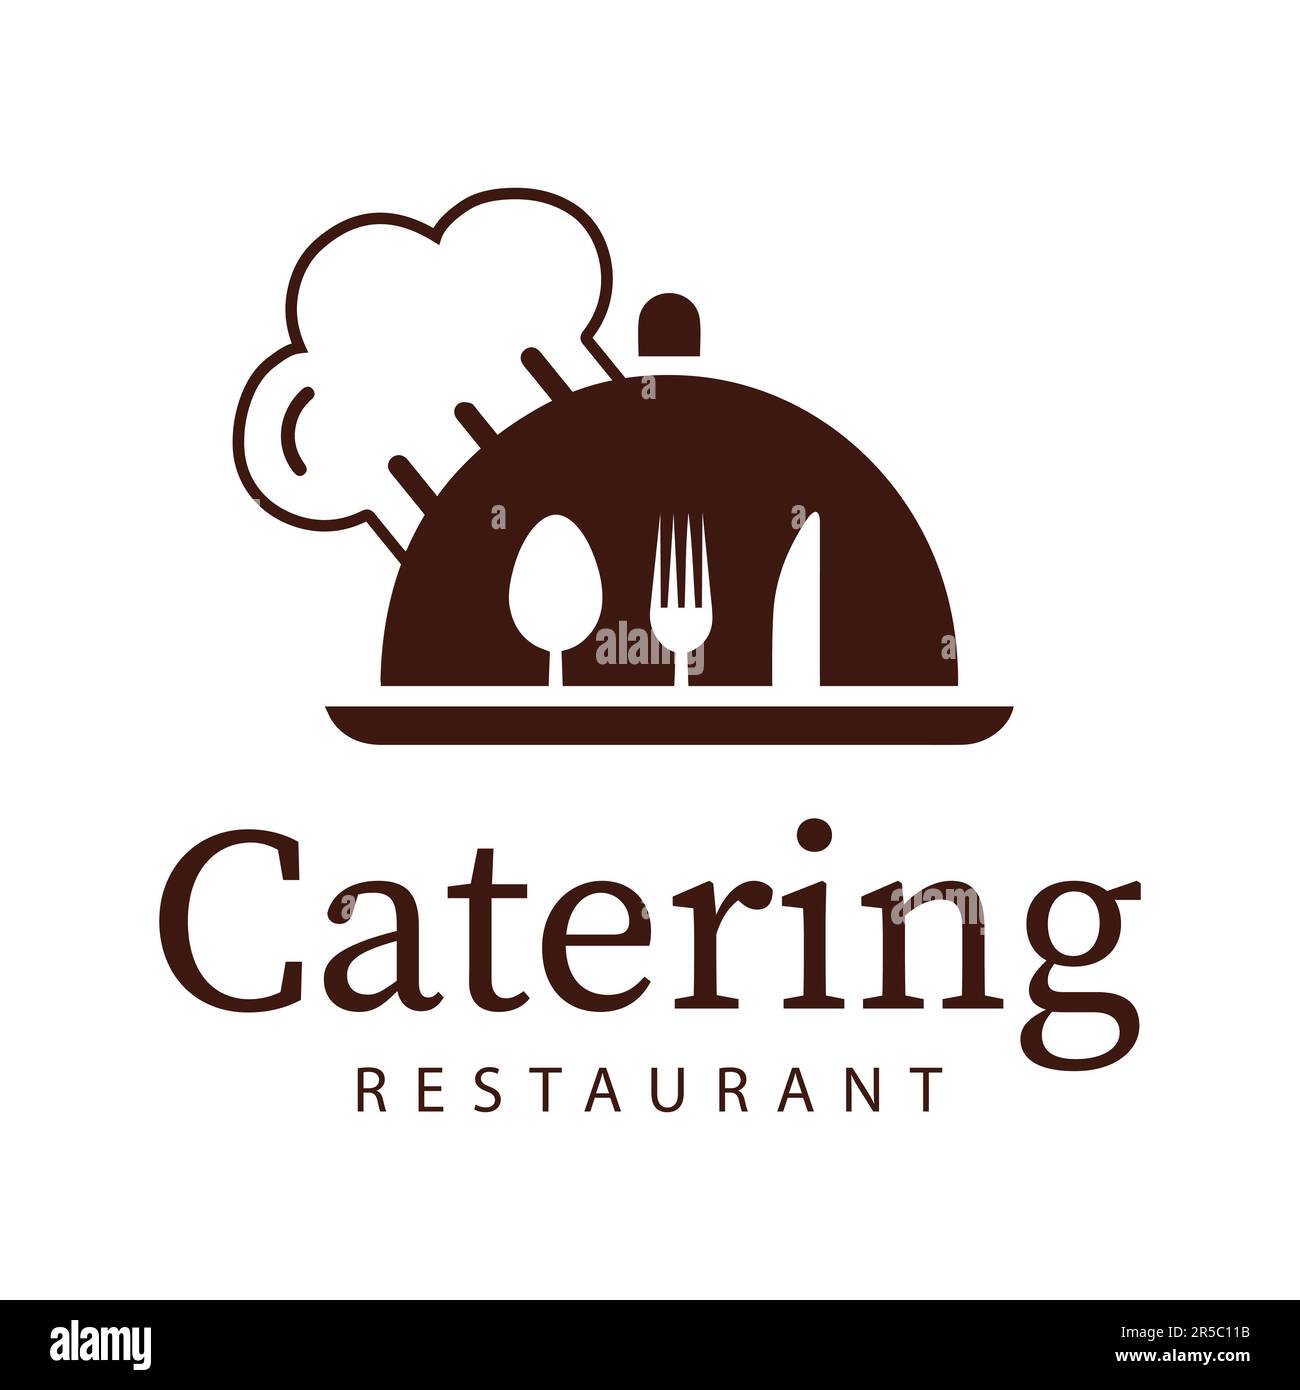 Catering Logo Design Chef Cap Fork and Spoon Logotype Stock Vector ...